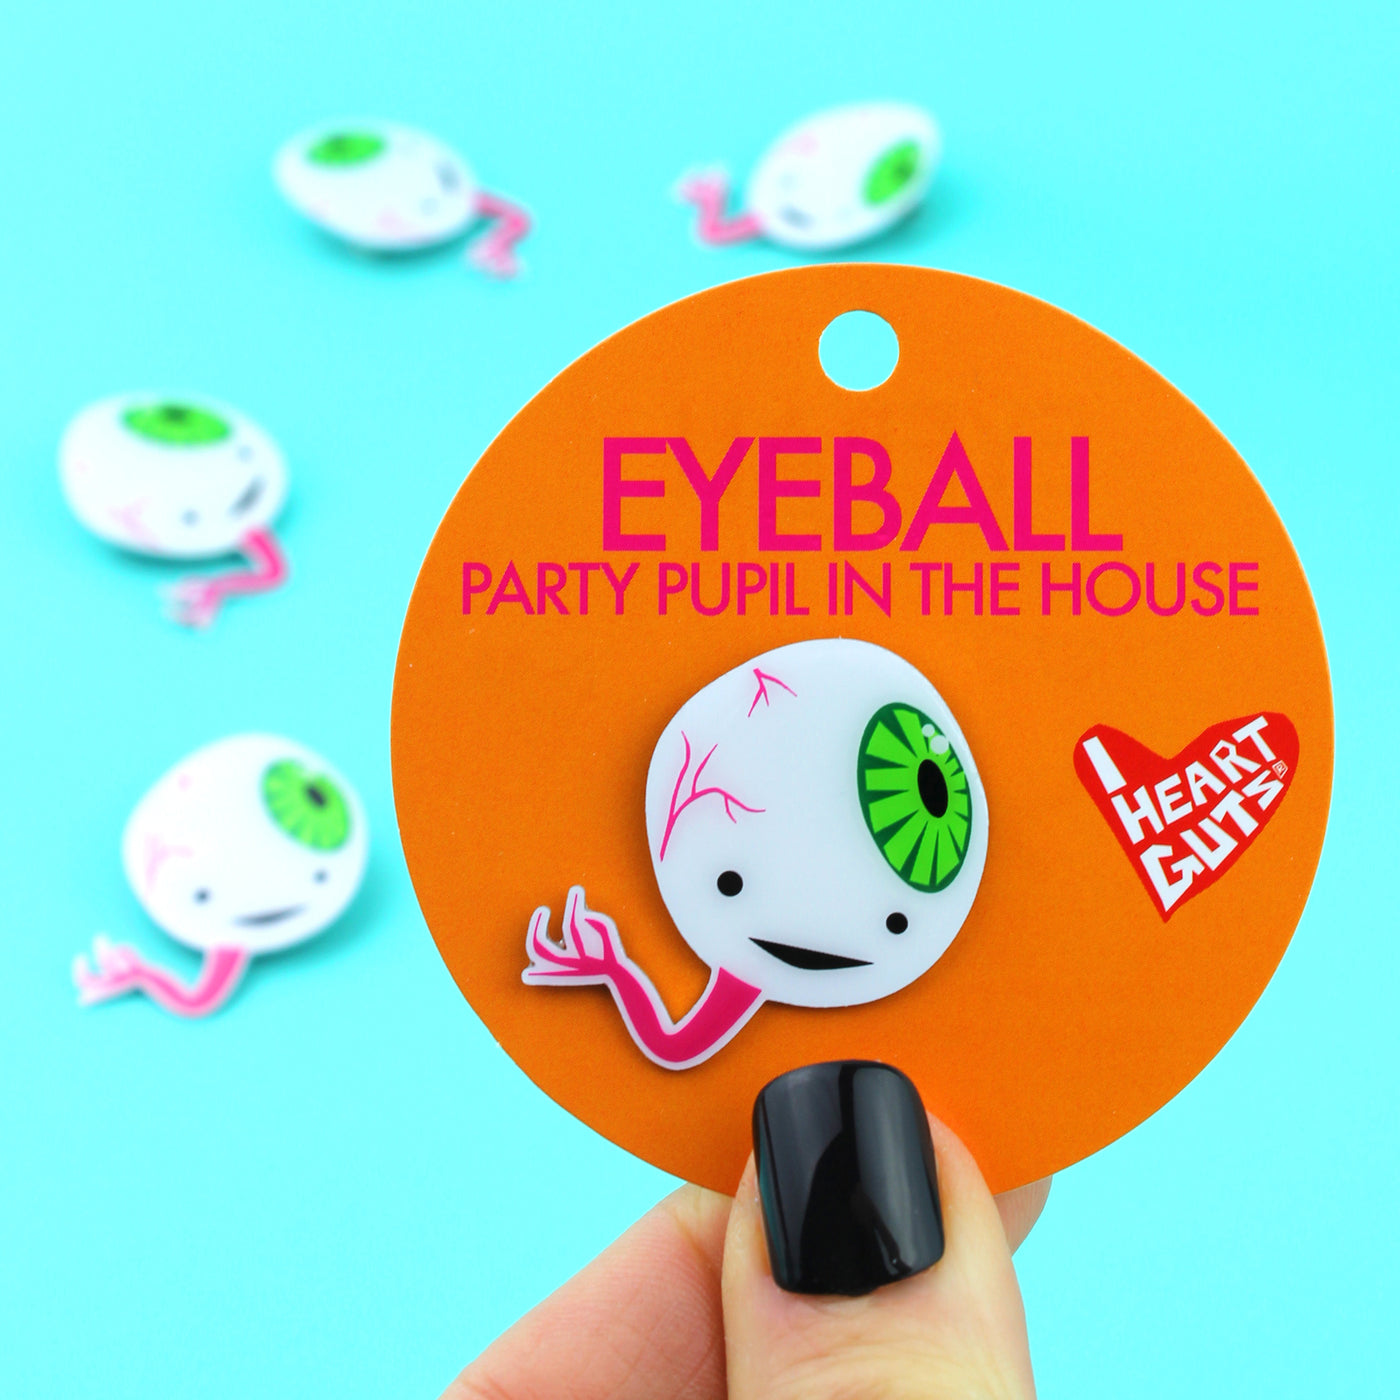 Eyeball Lapel Pin - Party Pupil in the House!